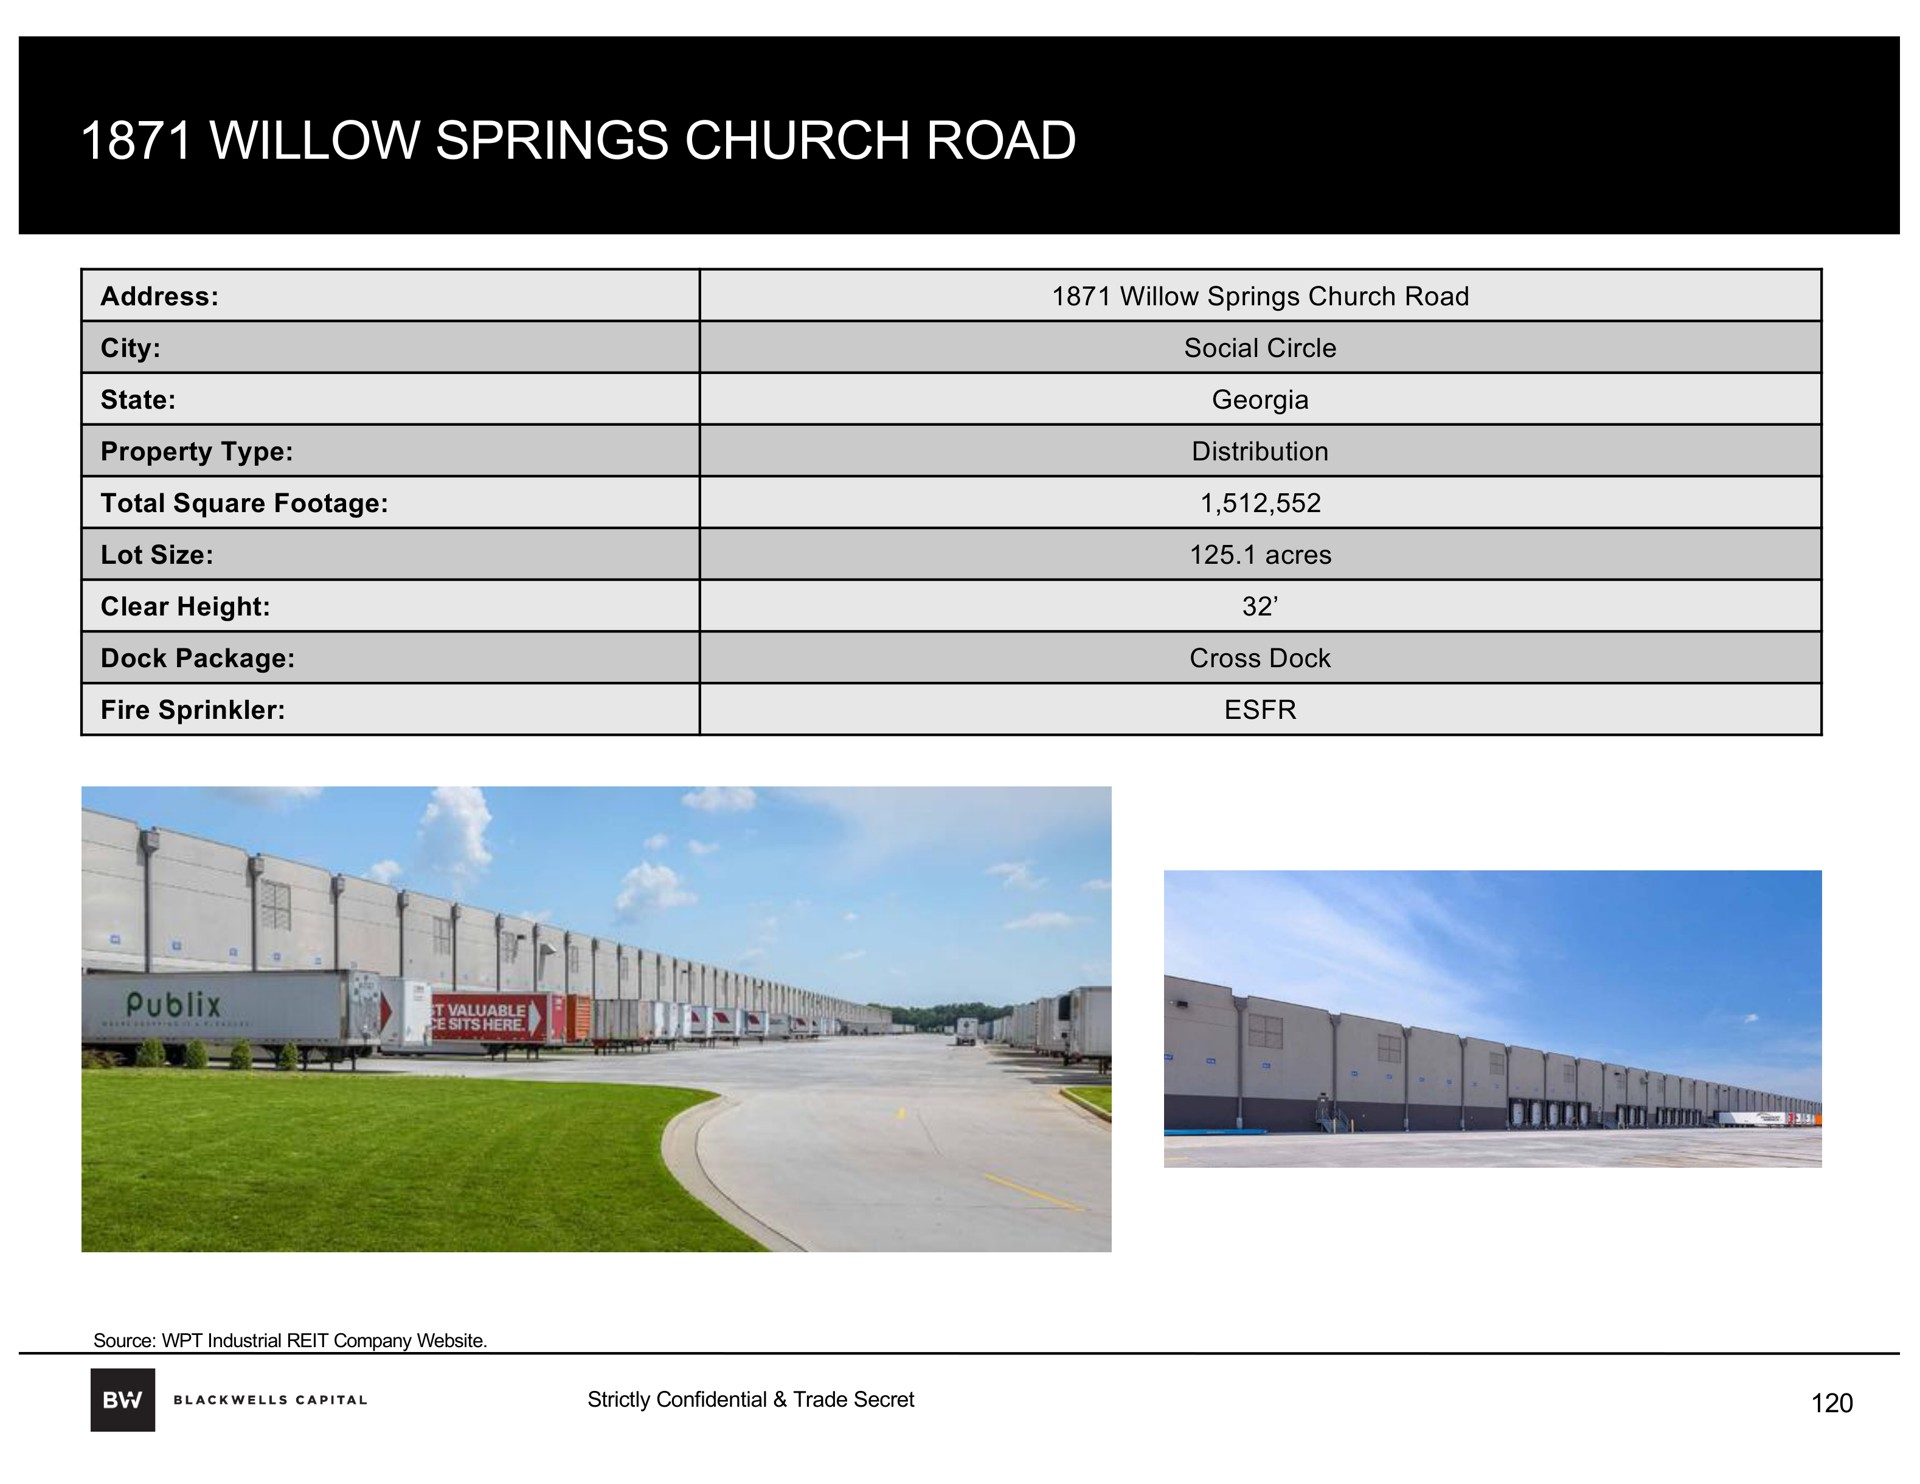 willow springs church road a | Blackwells Capital